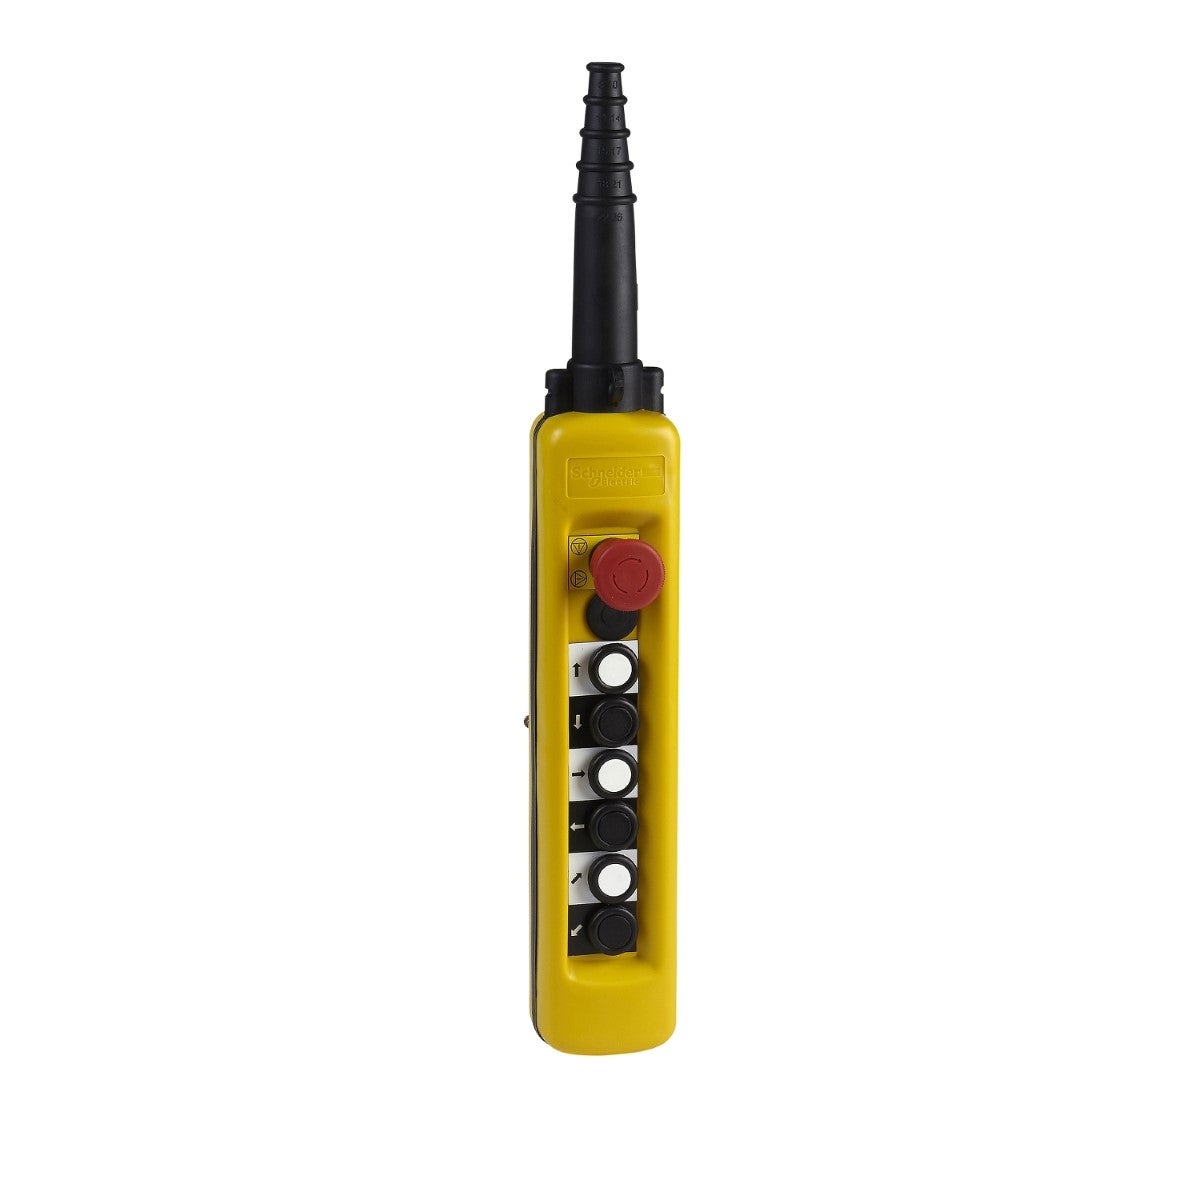 Pendant control station, Harmony XAC, plastic, yellow, 6 push buttons 1NO, 1 emergency stop trigger action 3NC